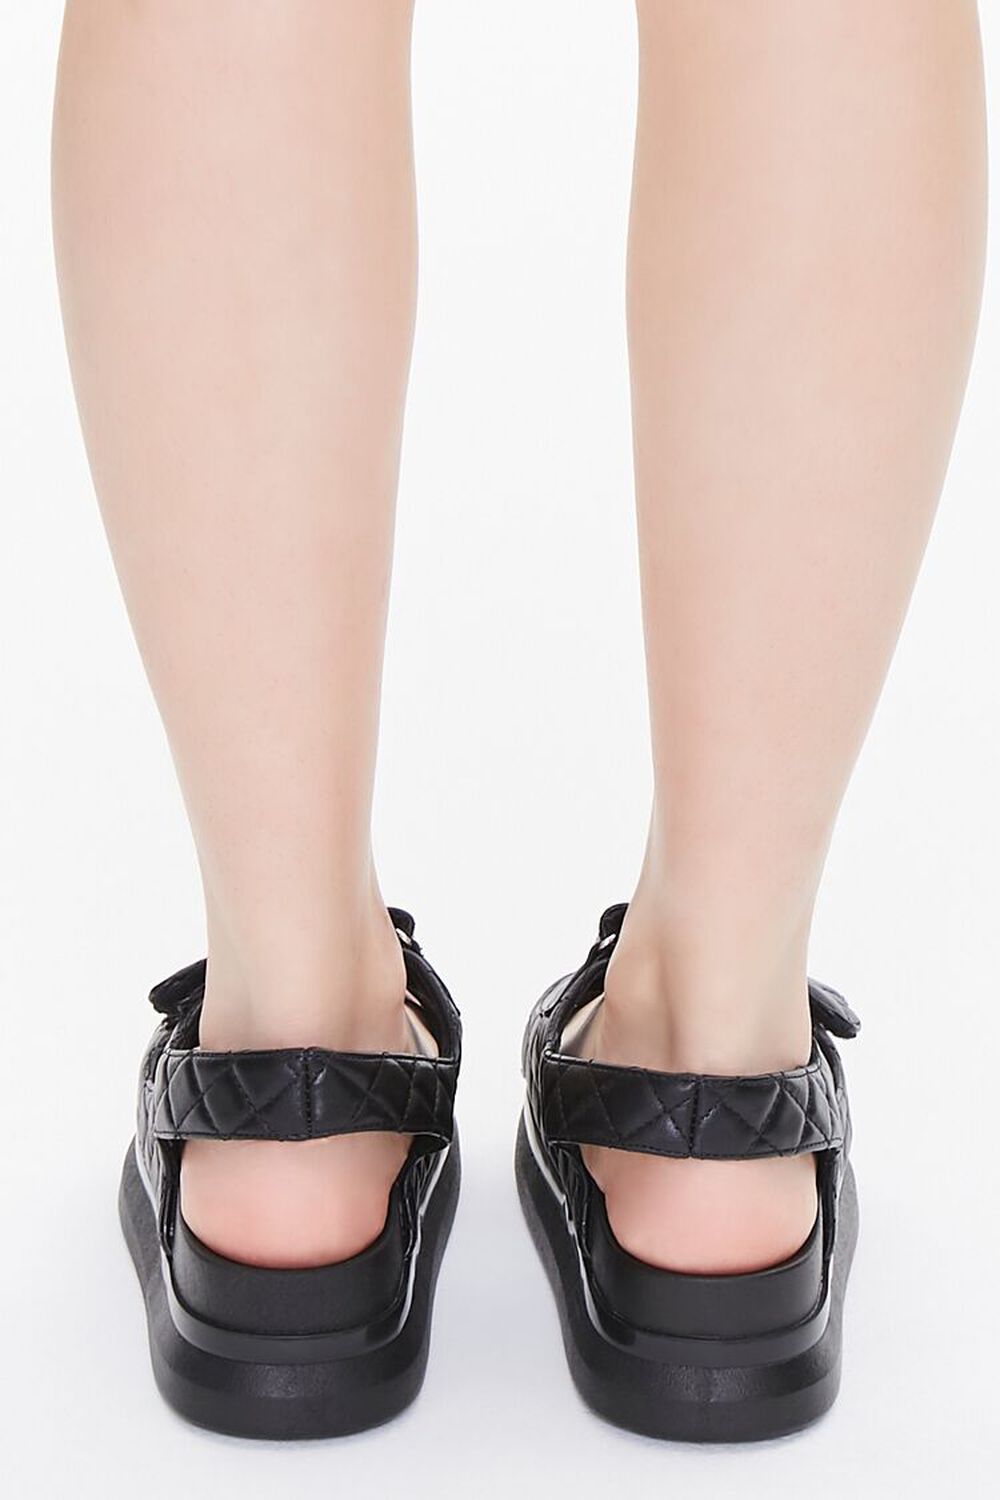 BLACK Buckled Quilted Wedges, image 3